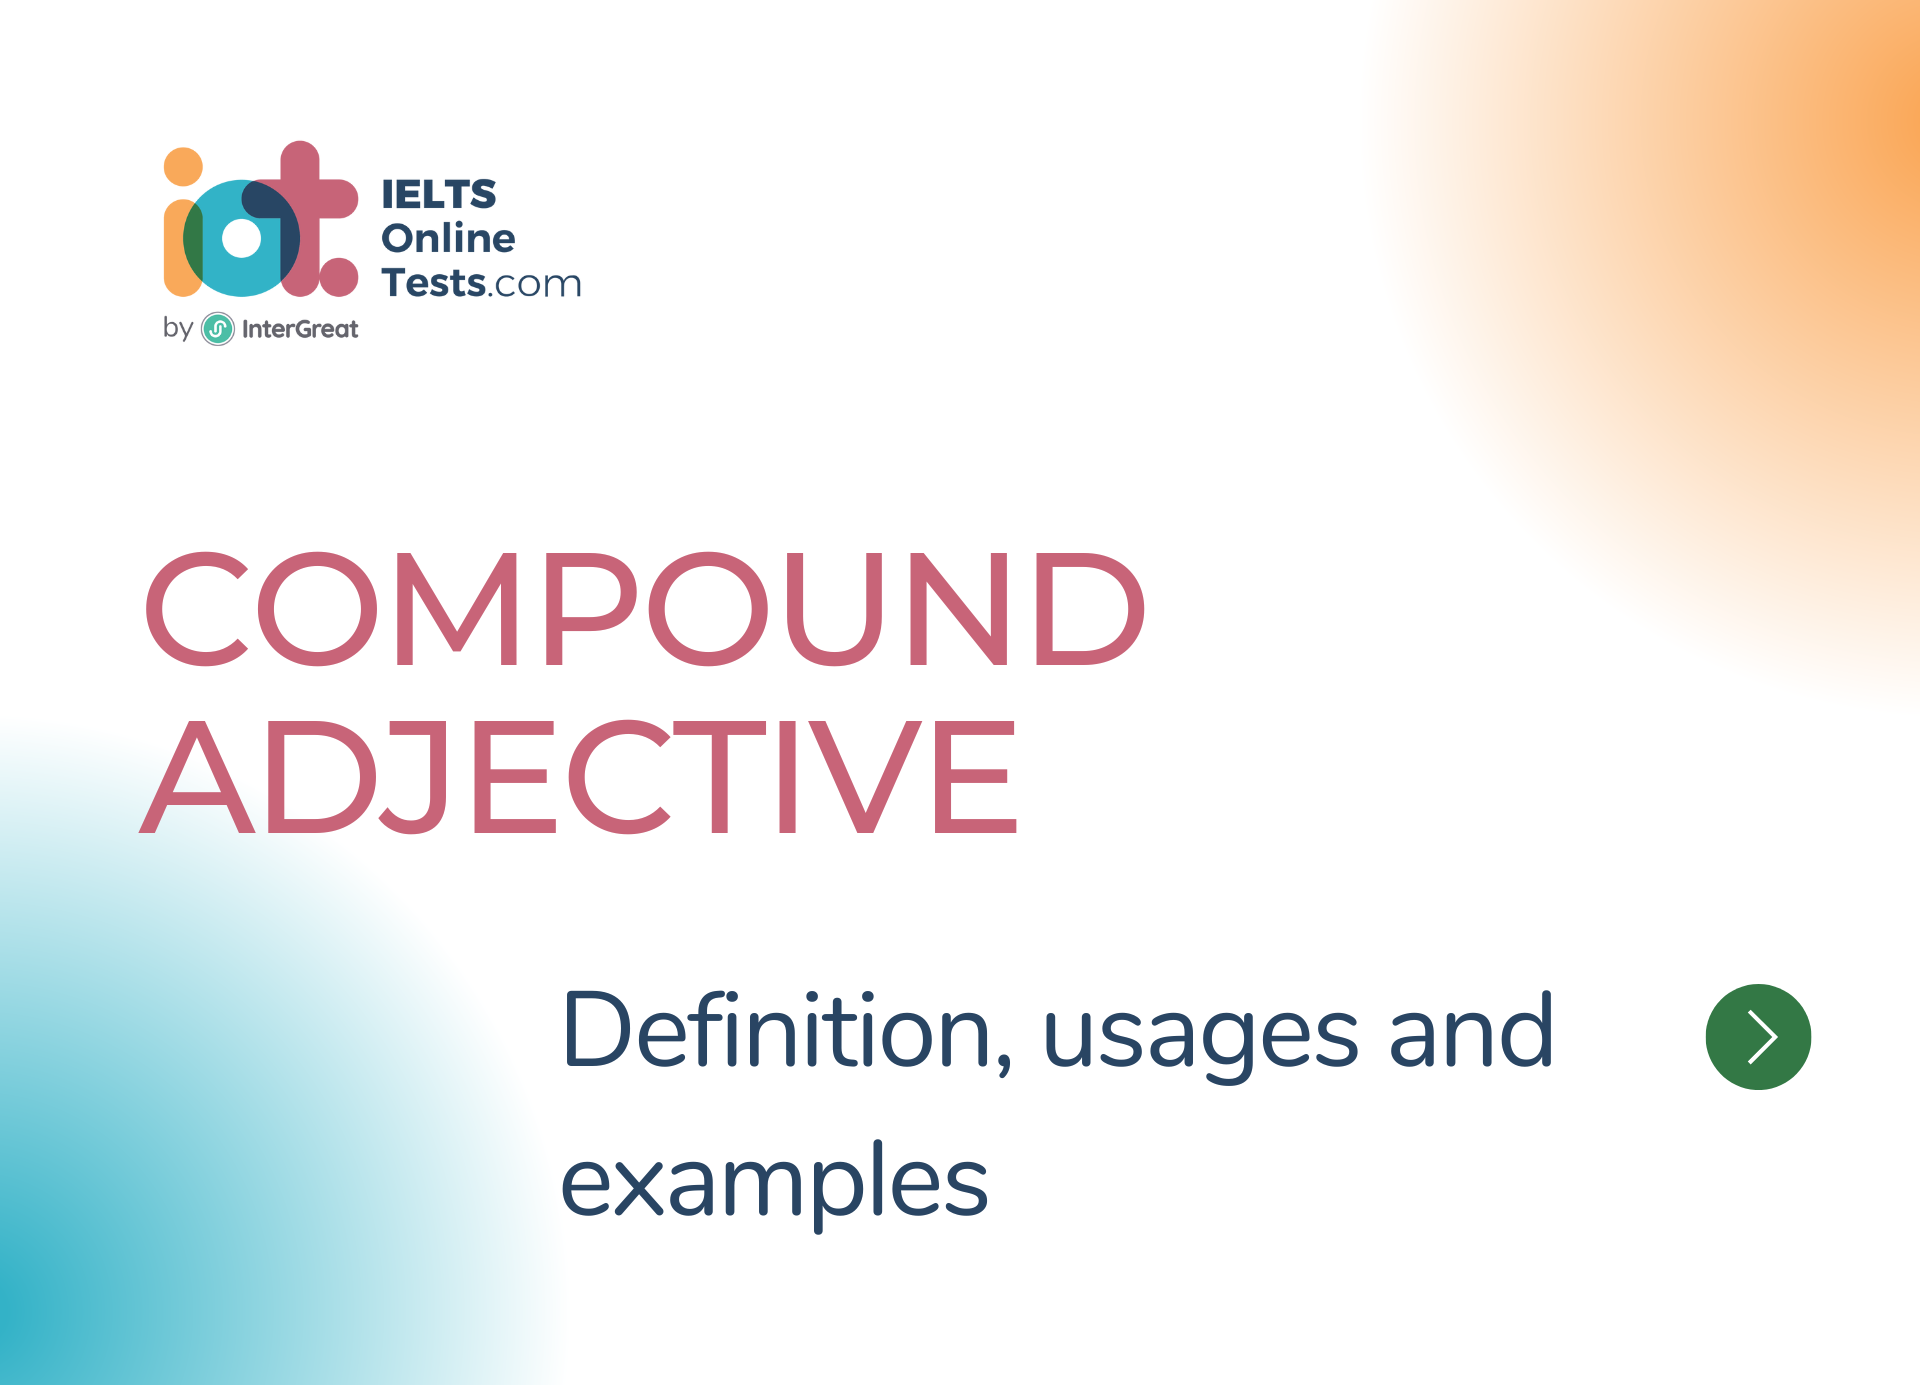 Compound Adjective definition, usages and examples